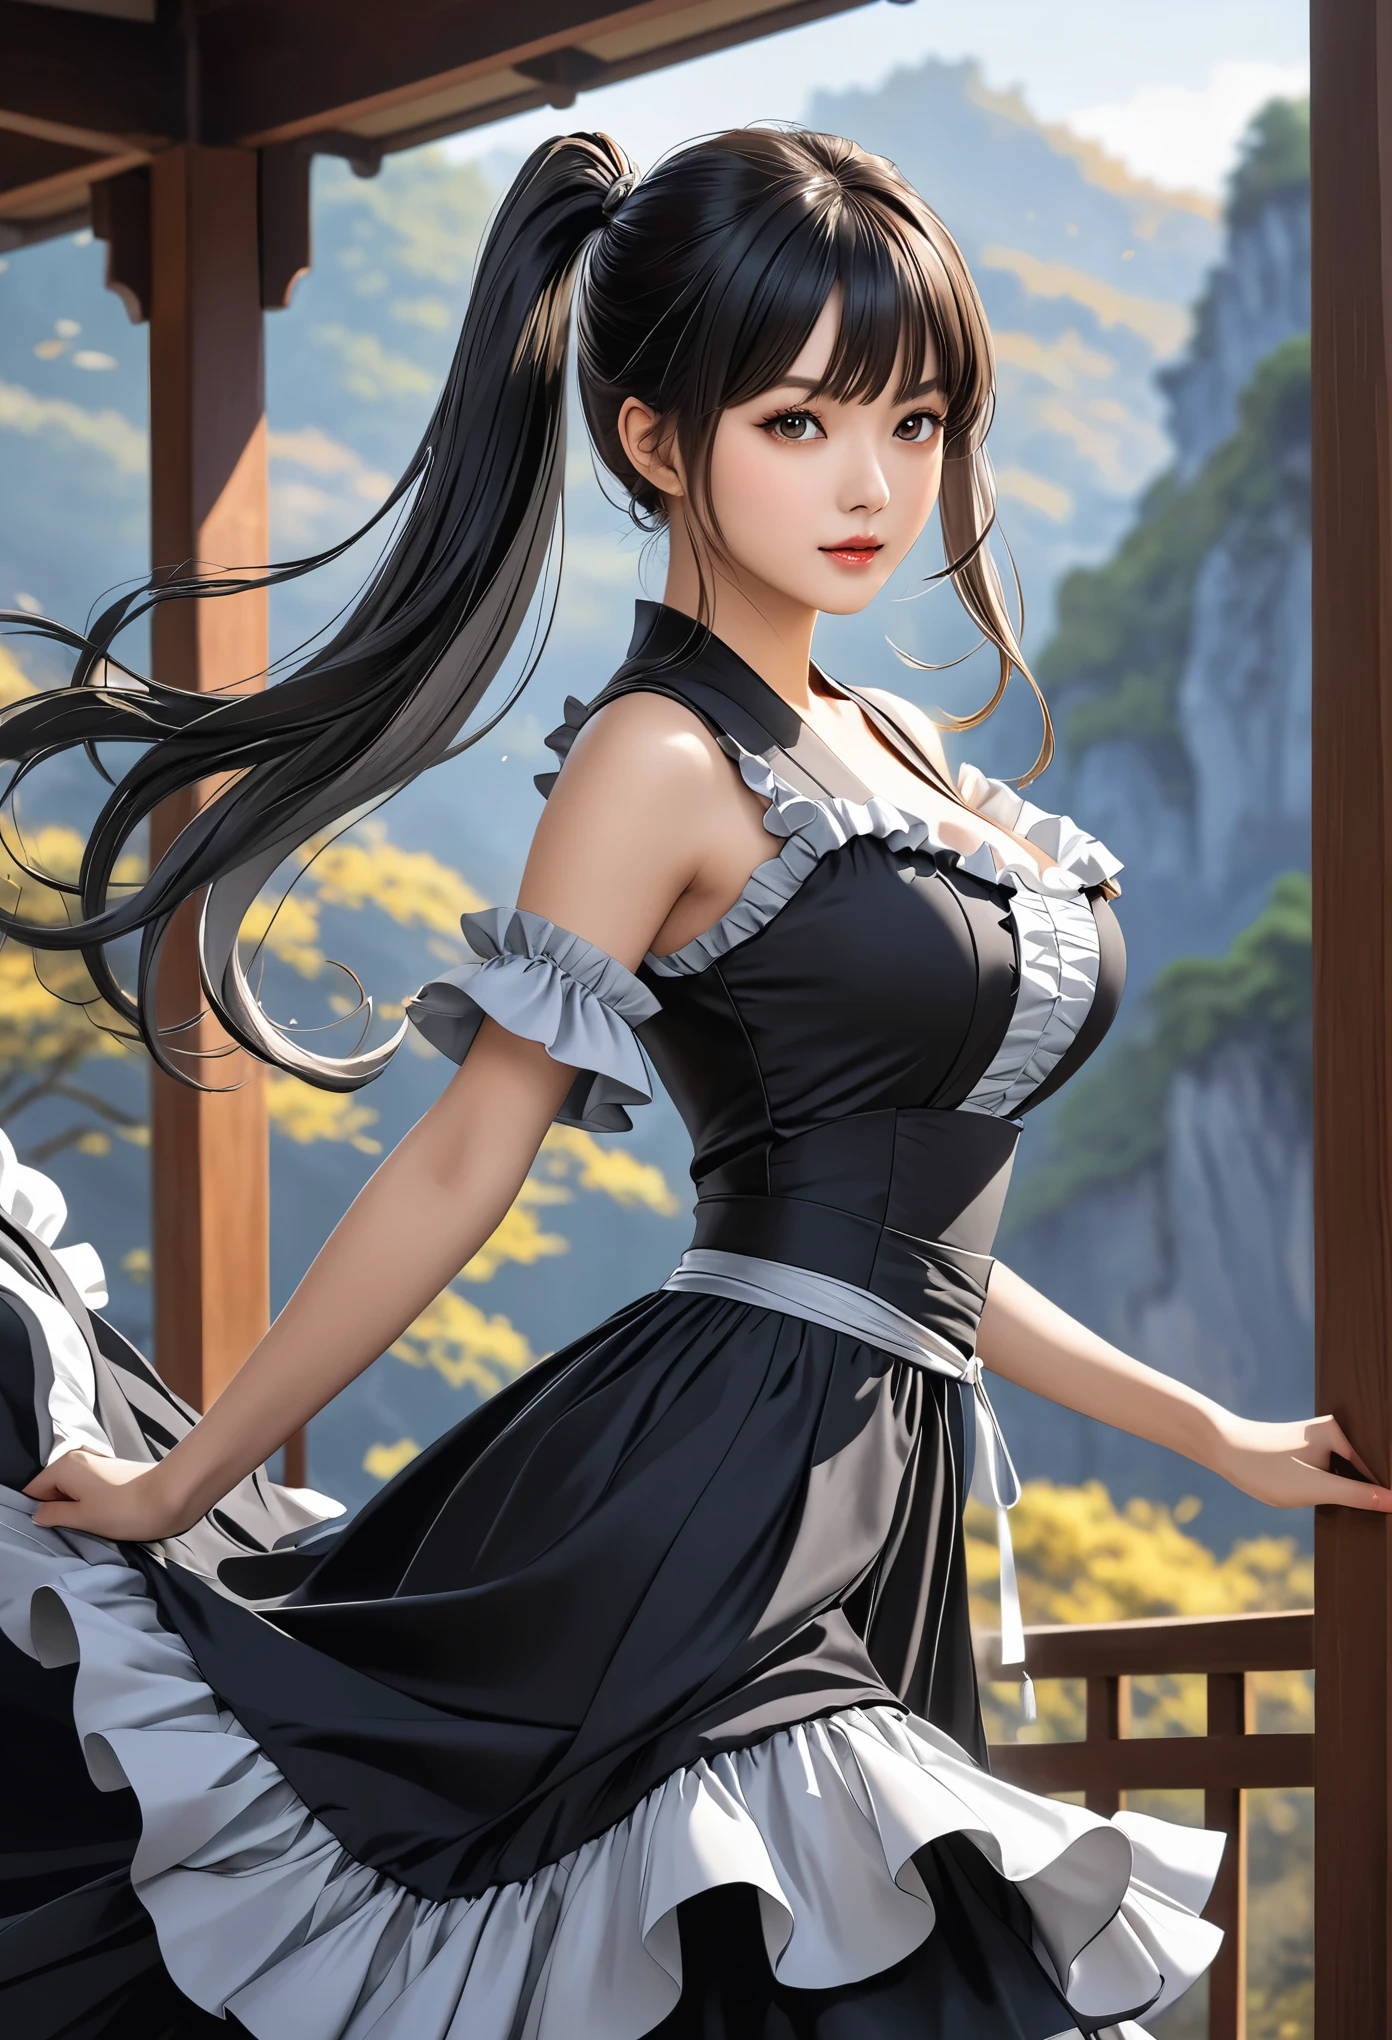 (((masterpiece))),((Highest quality)),Beautiful girl, Sexy witch, bangs、(Long Hair, side pony tails:1.5)、(((big firm bouncing bust)))、23 years old、(gorgeous white, Grey and black ruffled dress:1.5)、Japanese girl、 Beautiful digital artwork, Beautiful fantasy art,(The background is plain:1.5)、